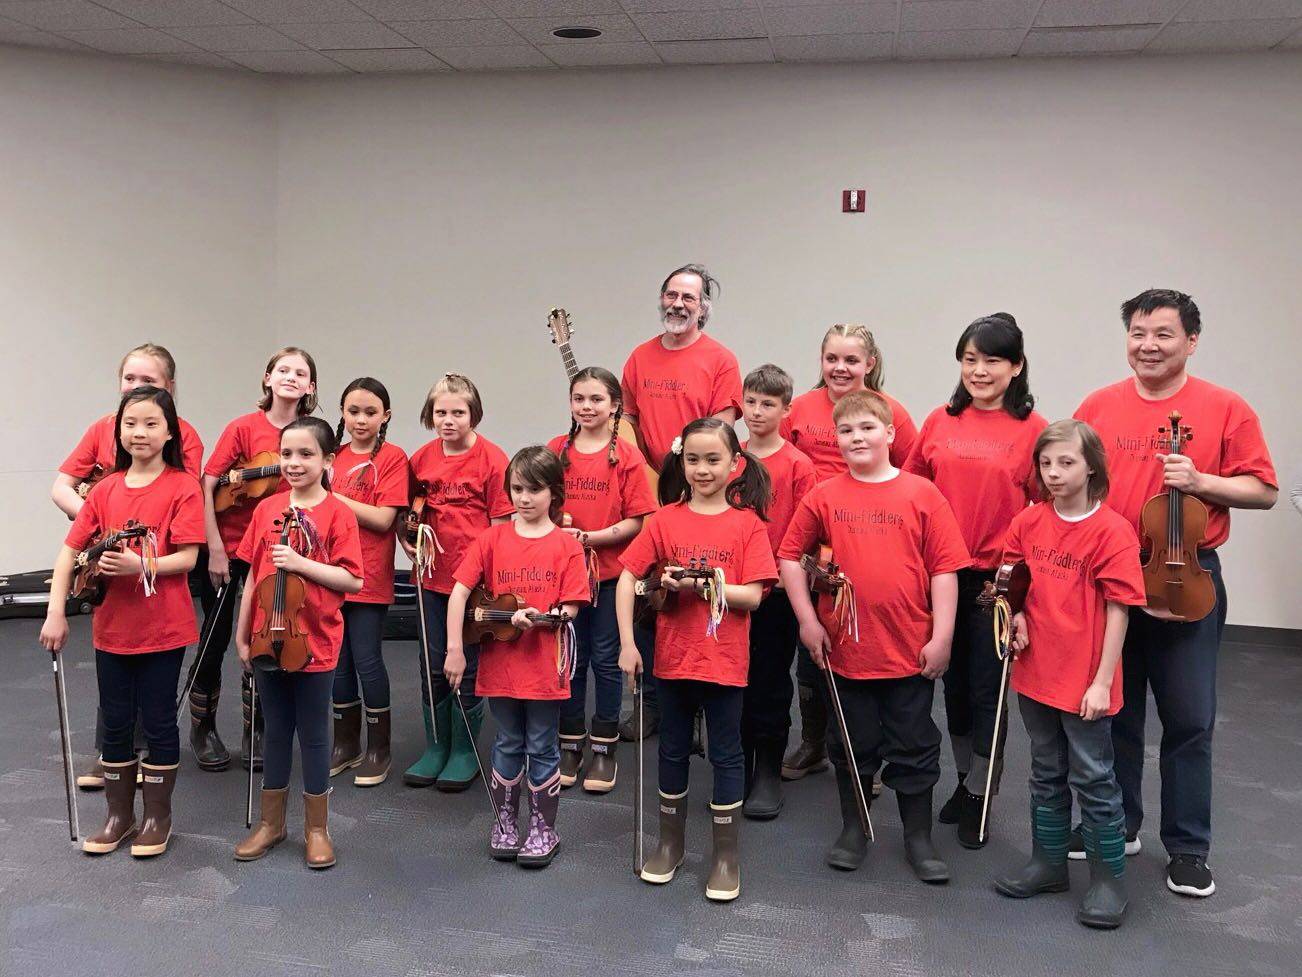 Mini-Fiddlers ready to perform at Folk Fest with accompanists Riley, Ali and Mei standing in the back row. Photo Courtesy of Xia.